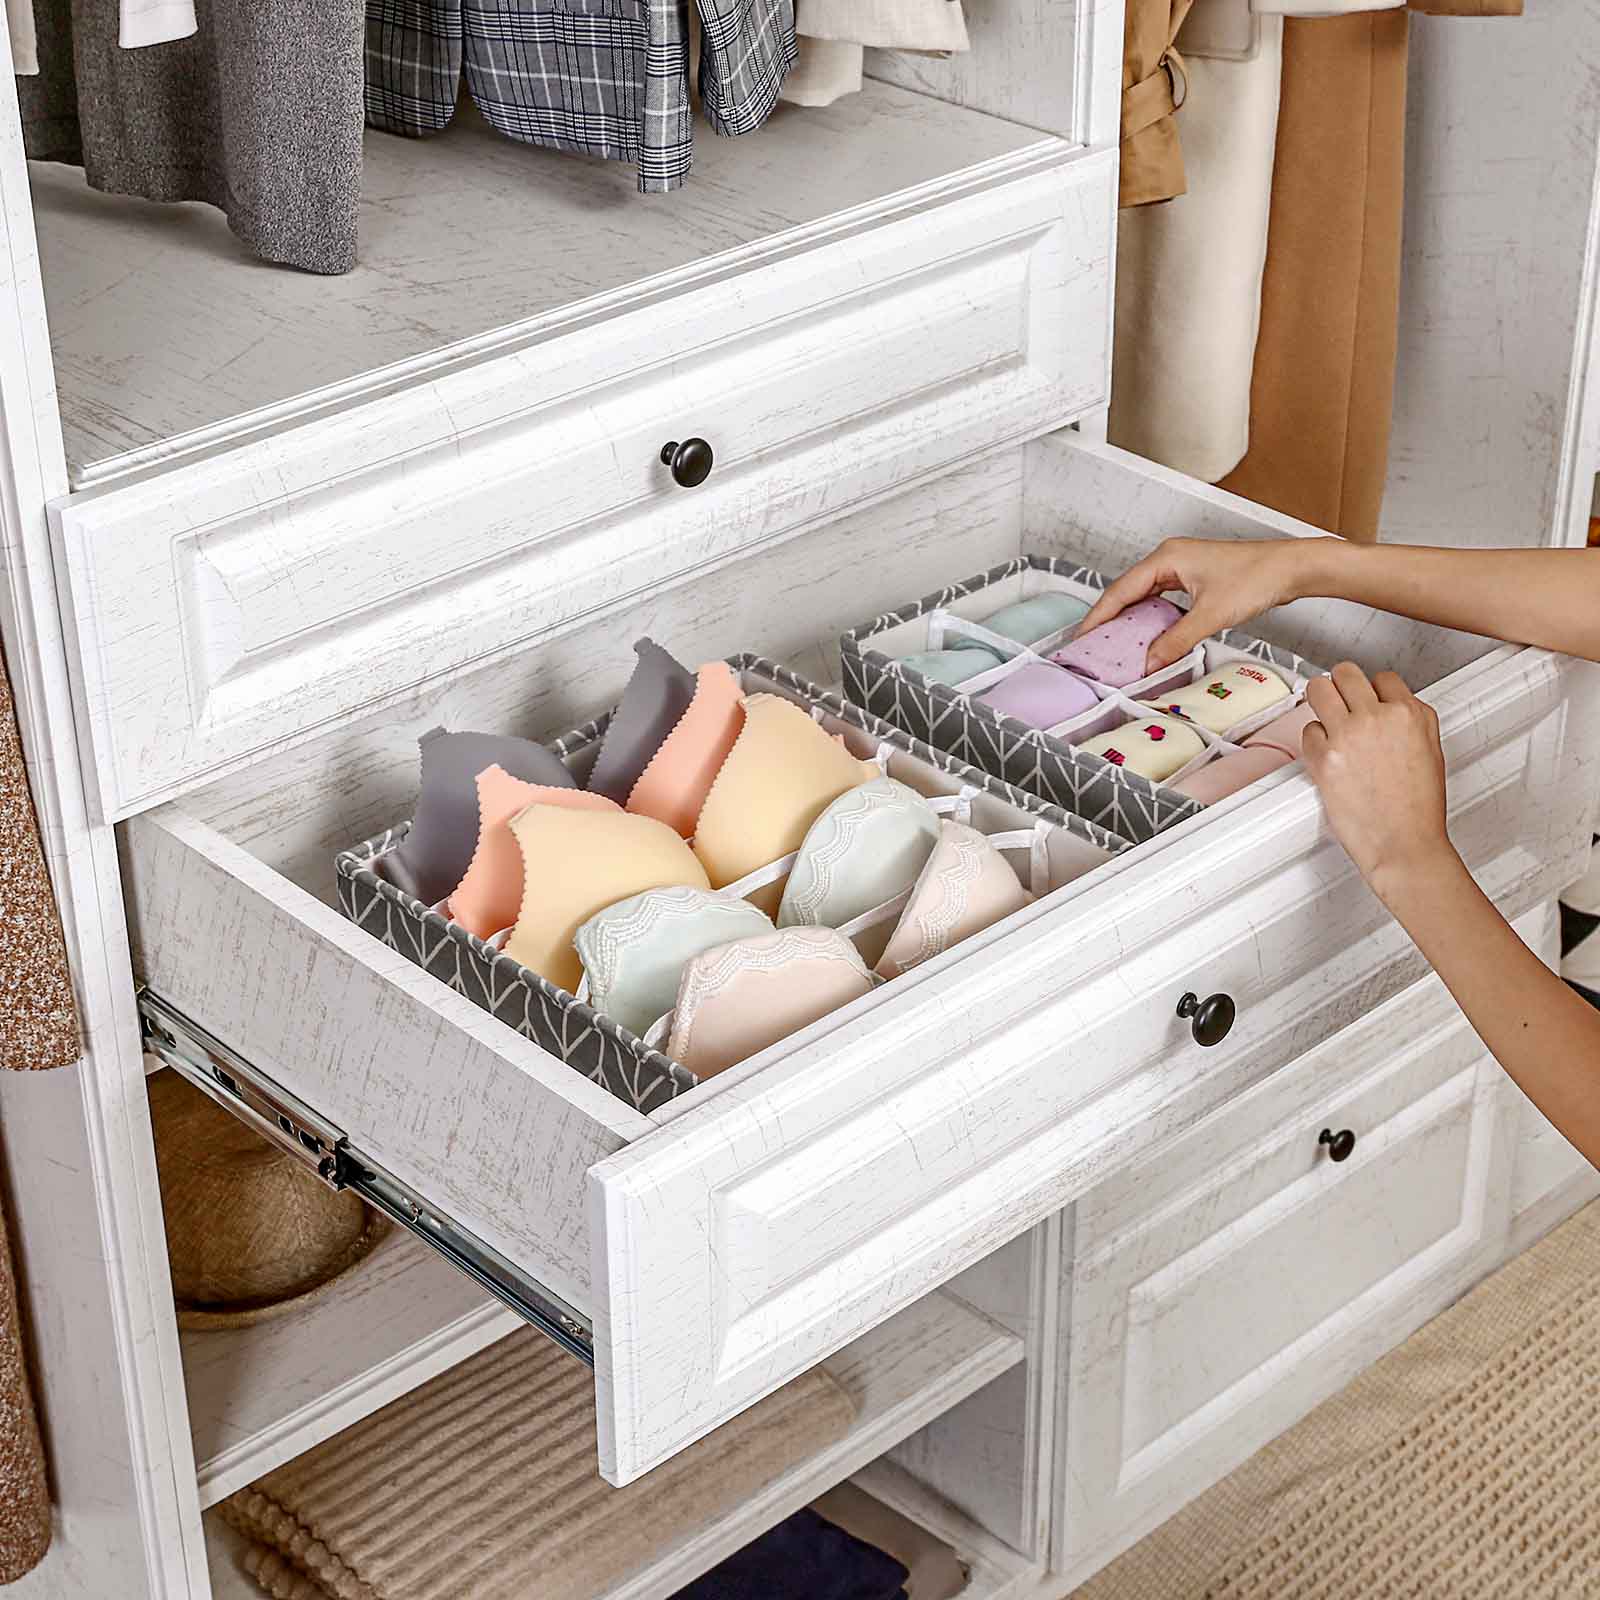 Too Many Bras, So Little Space: My Tips for Organizing Your Lingerie Drawer